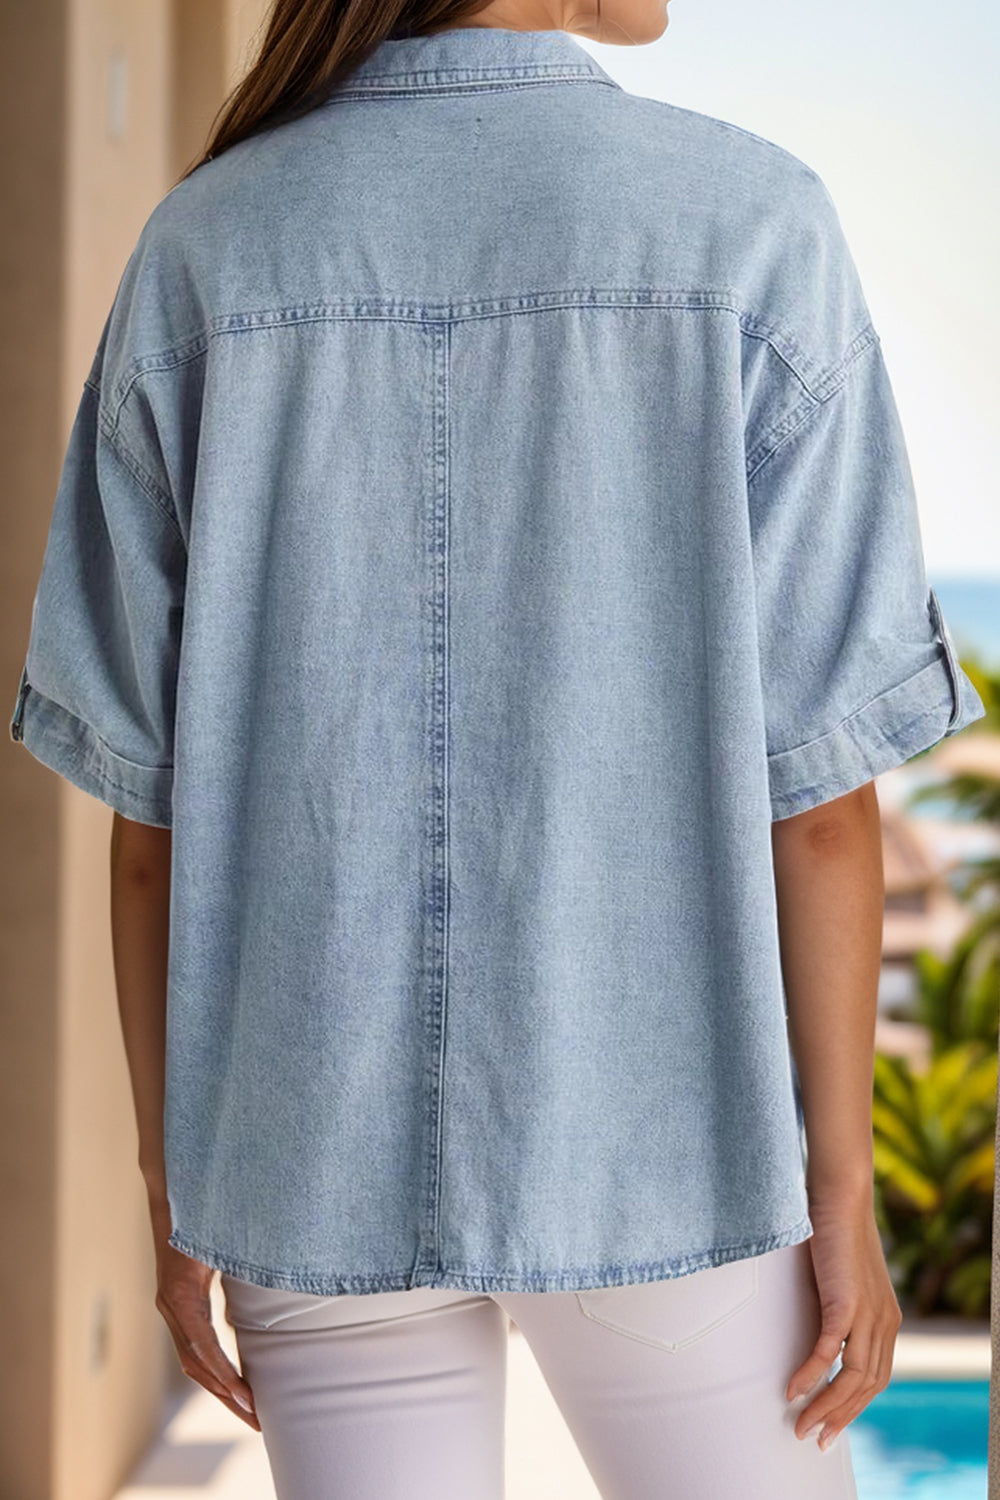 Stylish Pocketed Button Up Half Sleeve Denim Shirt for Casual Comfort and Versatility. Find Your Perfect Fit Today!